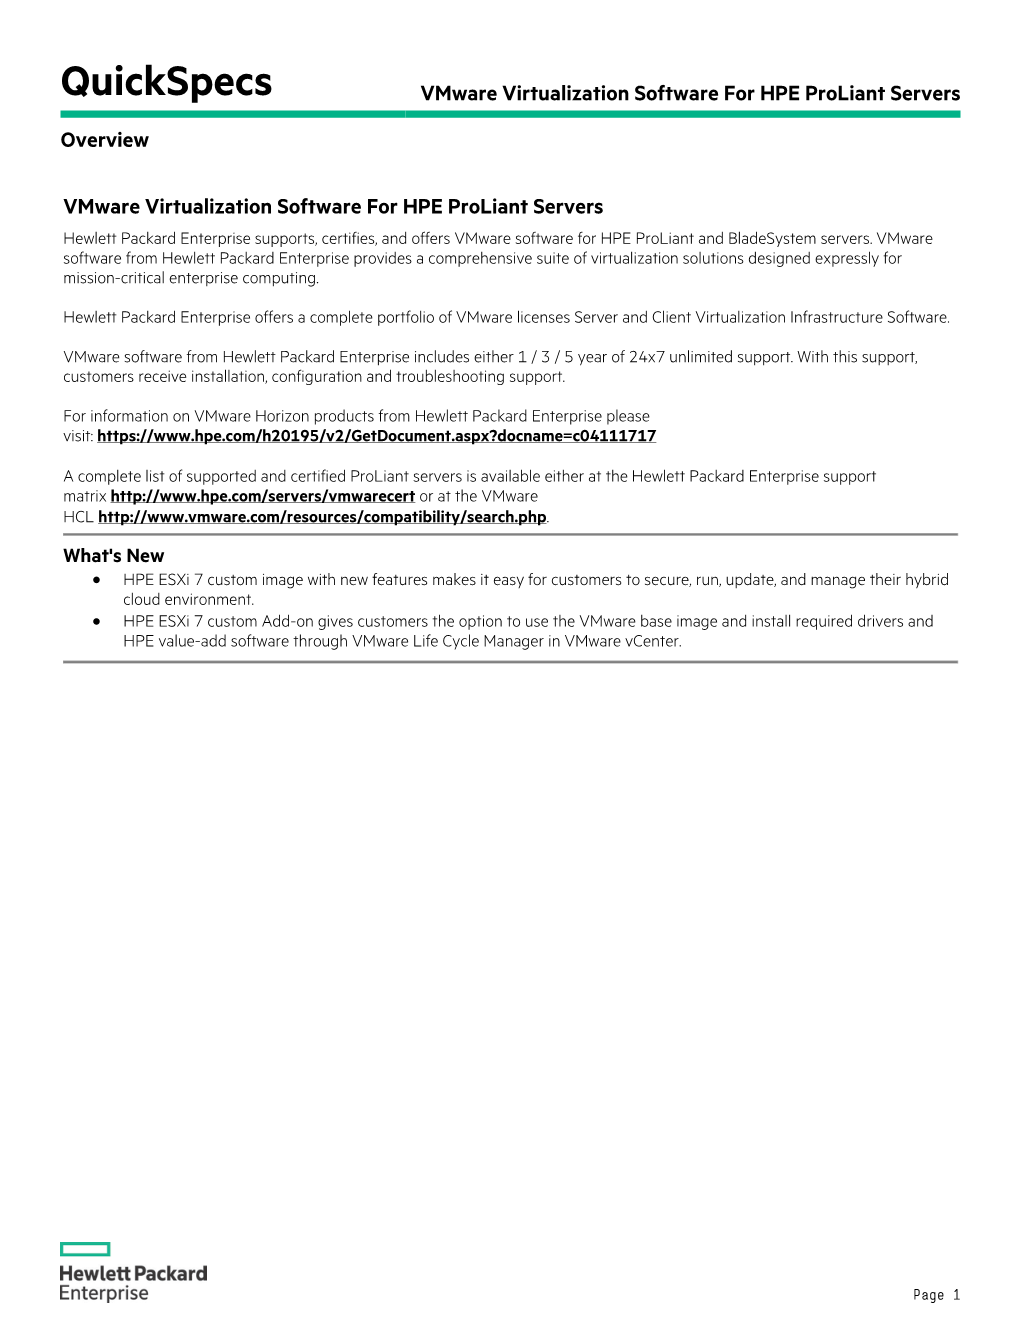 Vmware Virtualization Software for HPE Proliant Servers Overview